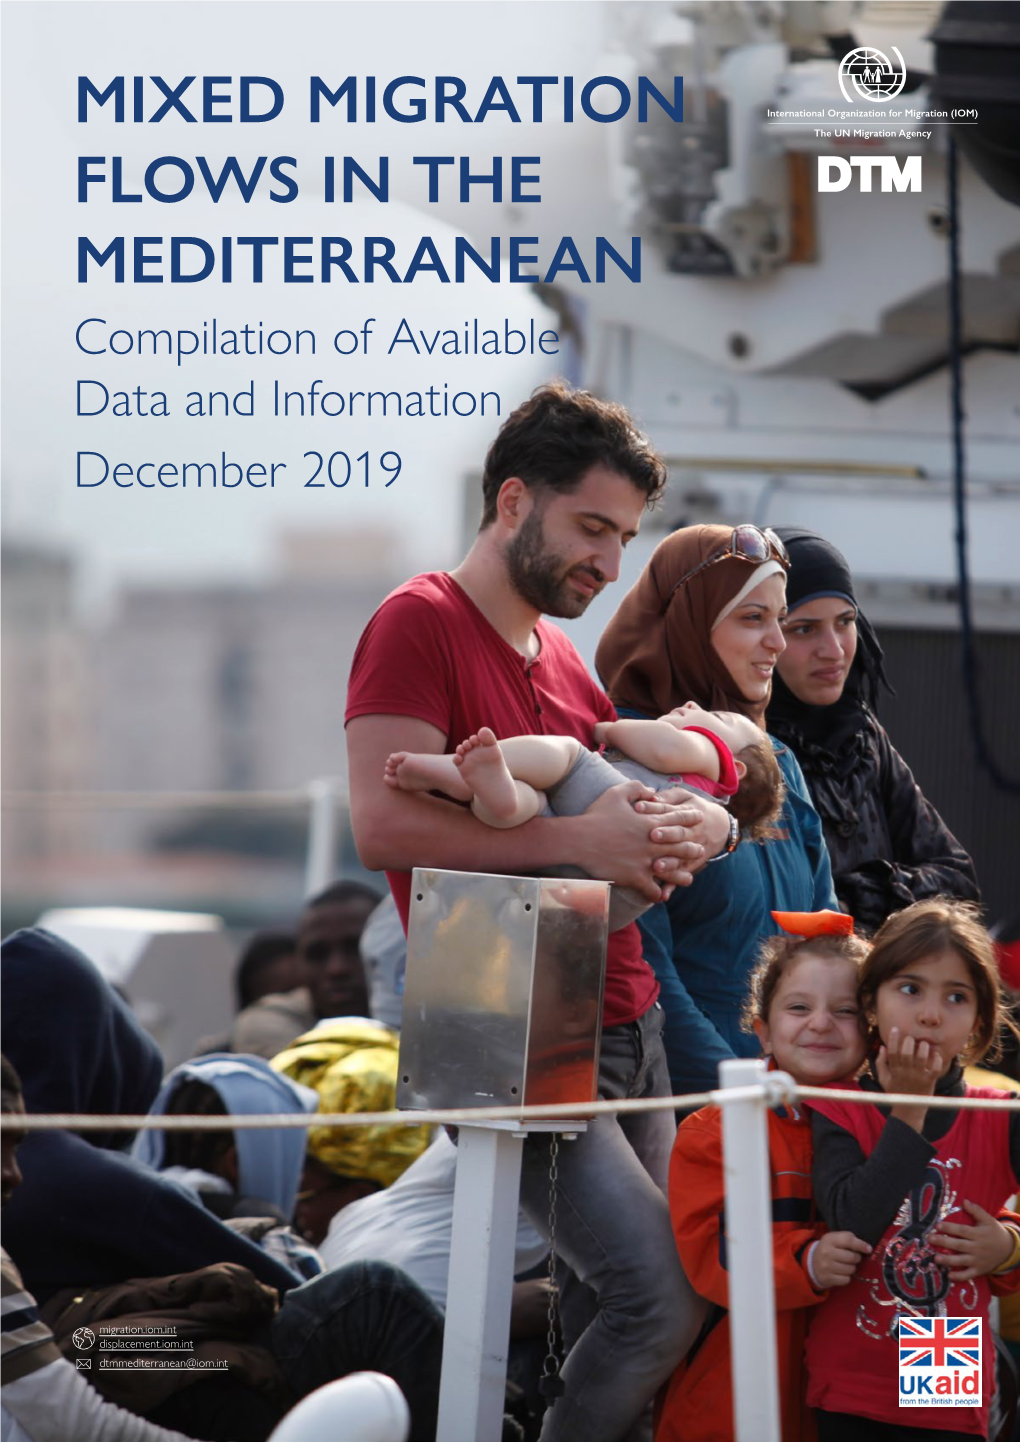 MIXED MIGRATION FLOWS in the MEDITERRANEAN Compilation of Available Data and Information December 2019 Contents Highlights